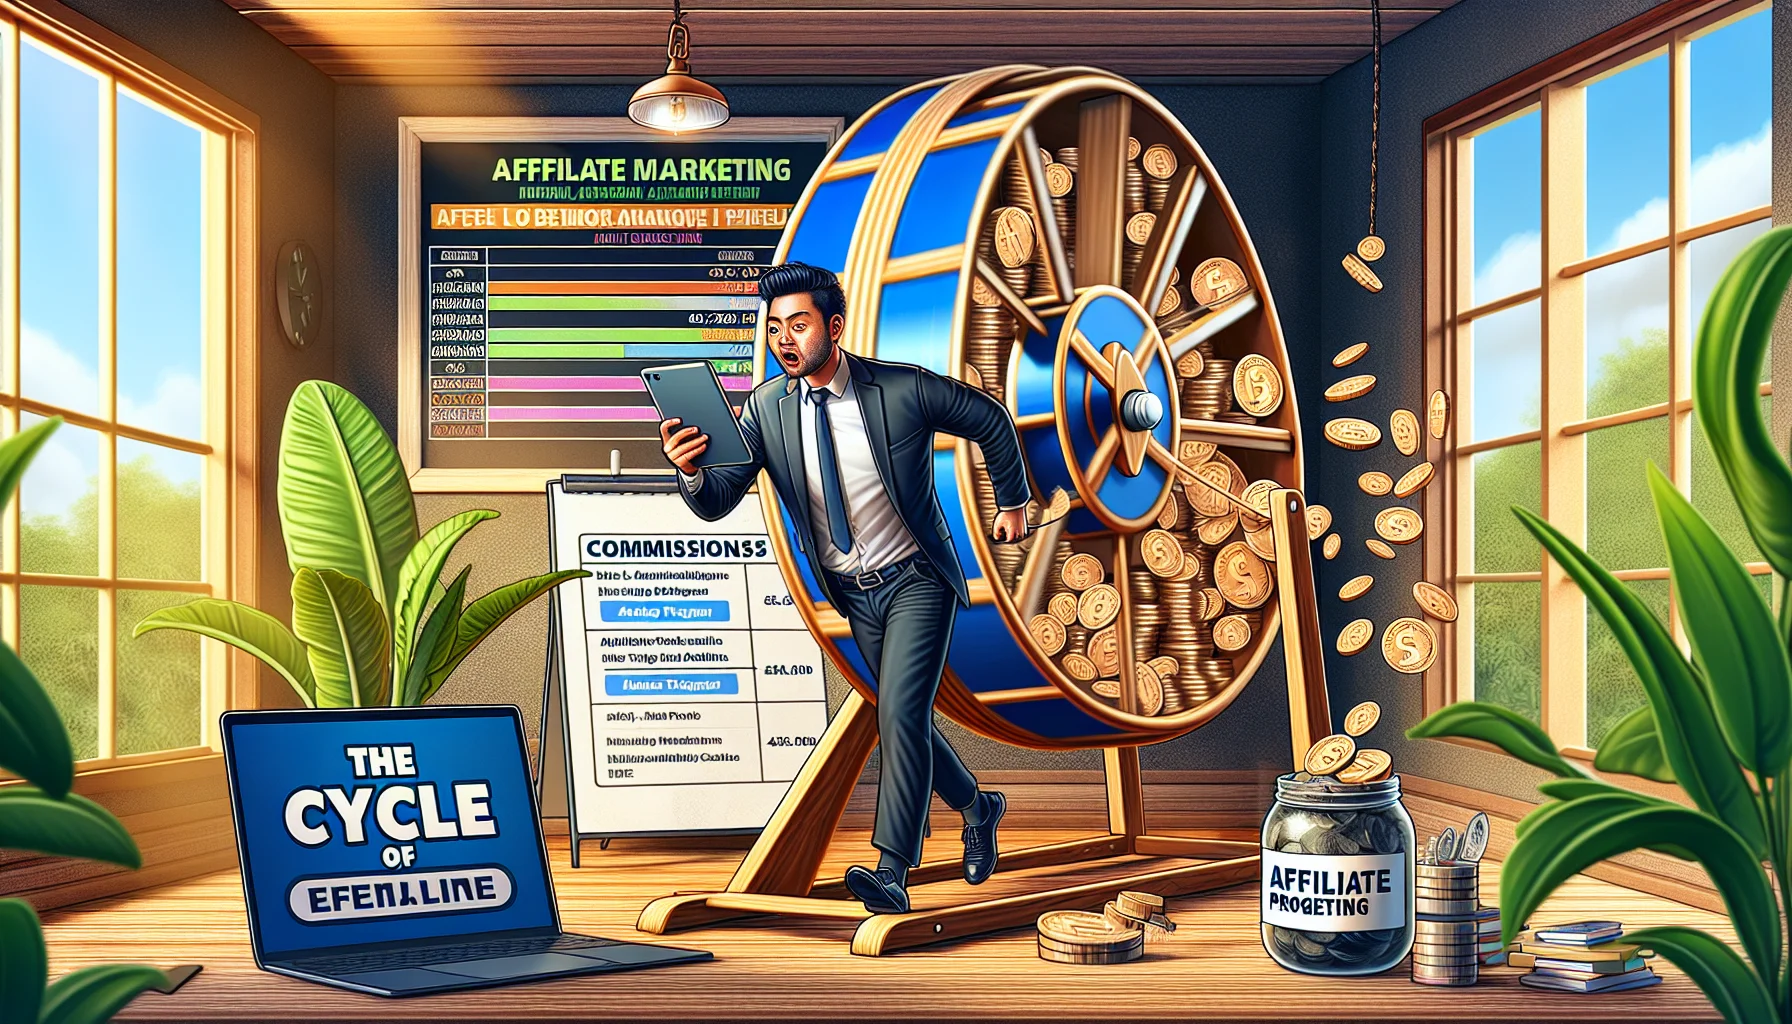 A humorous and realistic scene highlighting the truth about affiliate marketing in the context of making money online. Picture a metaphorical hamster wheel, where a determined South Asian man dressed in business attire is running, holding a tablet with constantly changing digital products. A flow of coins drops from the tablet into a collection jar labeled 'commissions'. Behind him, a leaderboard shows different affiliate programs and their relative successes. A large banner hangs overhead, reading 'The Cycle of Affiliate Marketing'. All set in a lush home office with abundant indoor plants, a modern ergonomic desk and warm lighting.